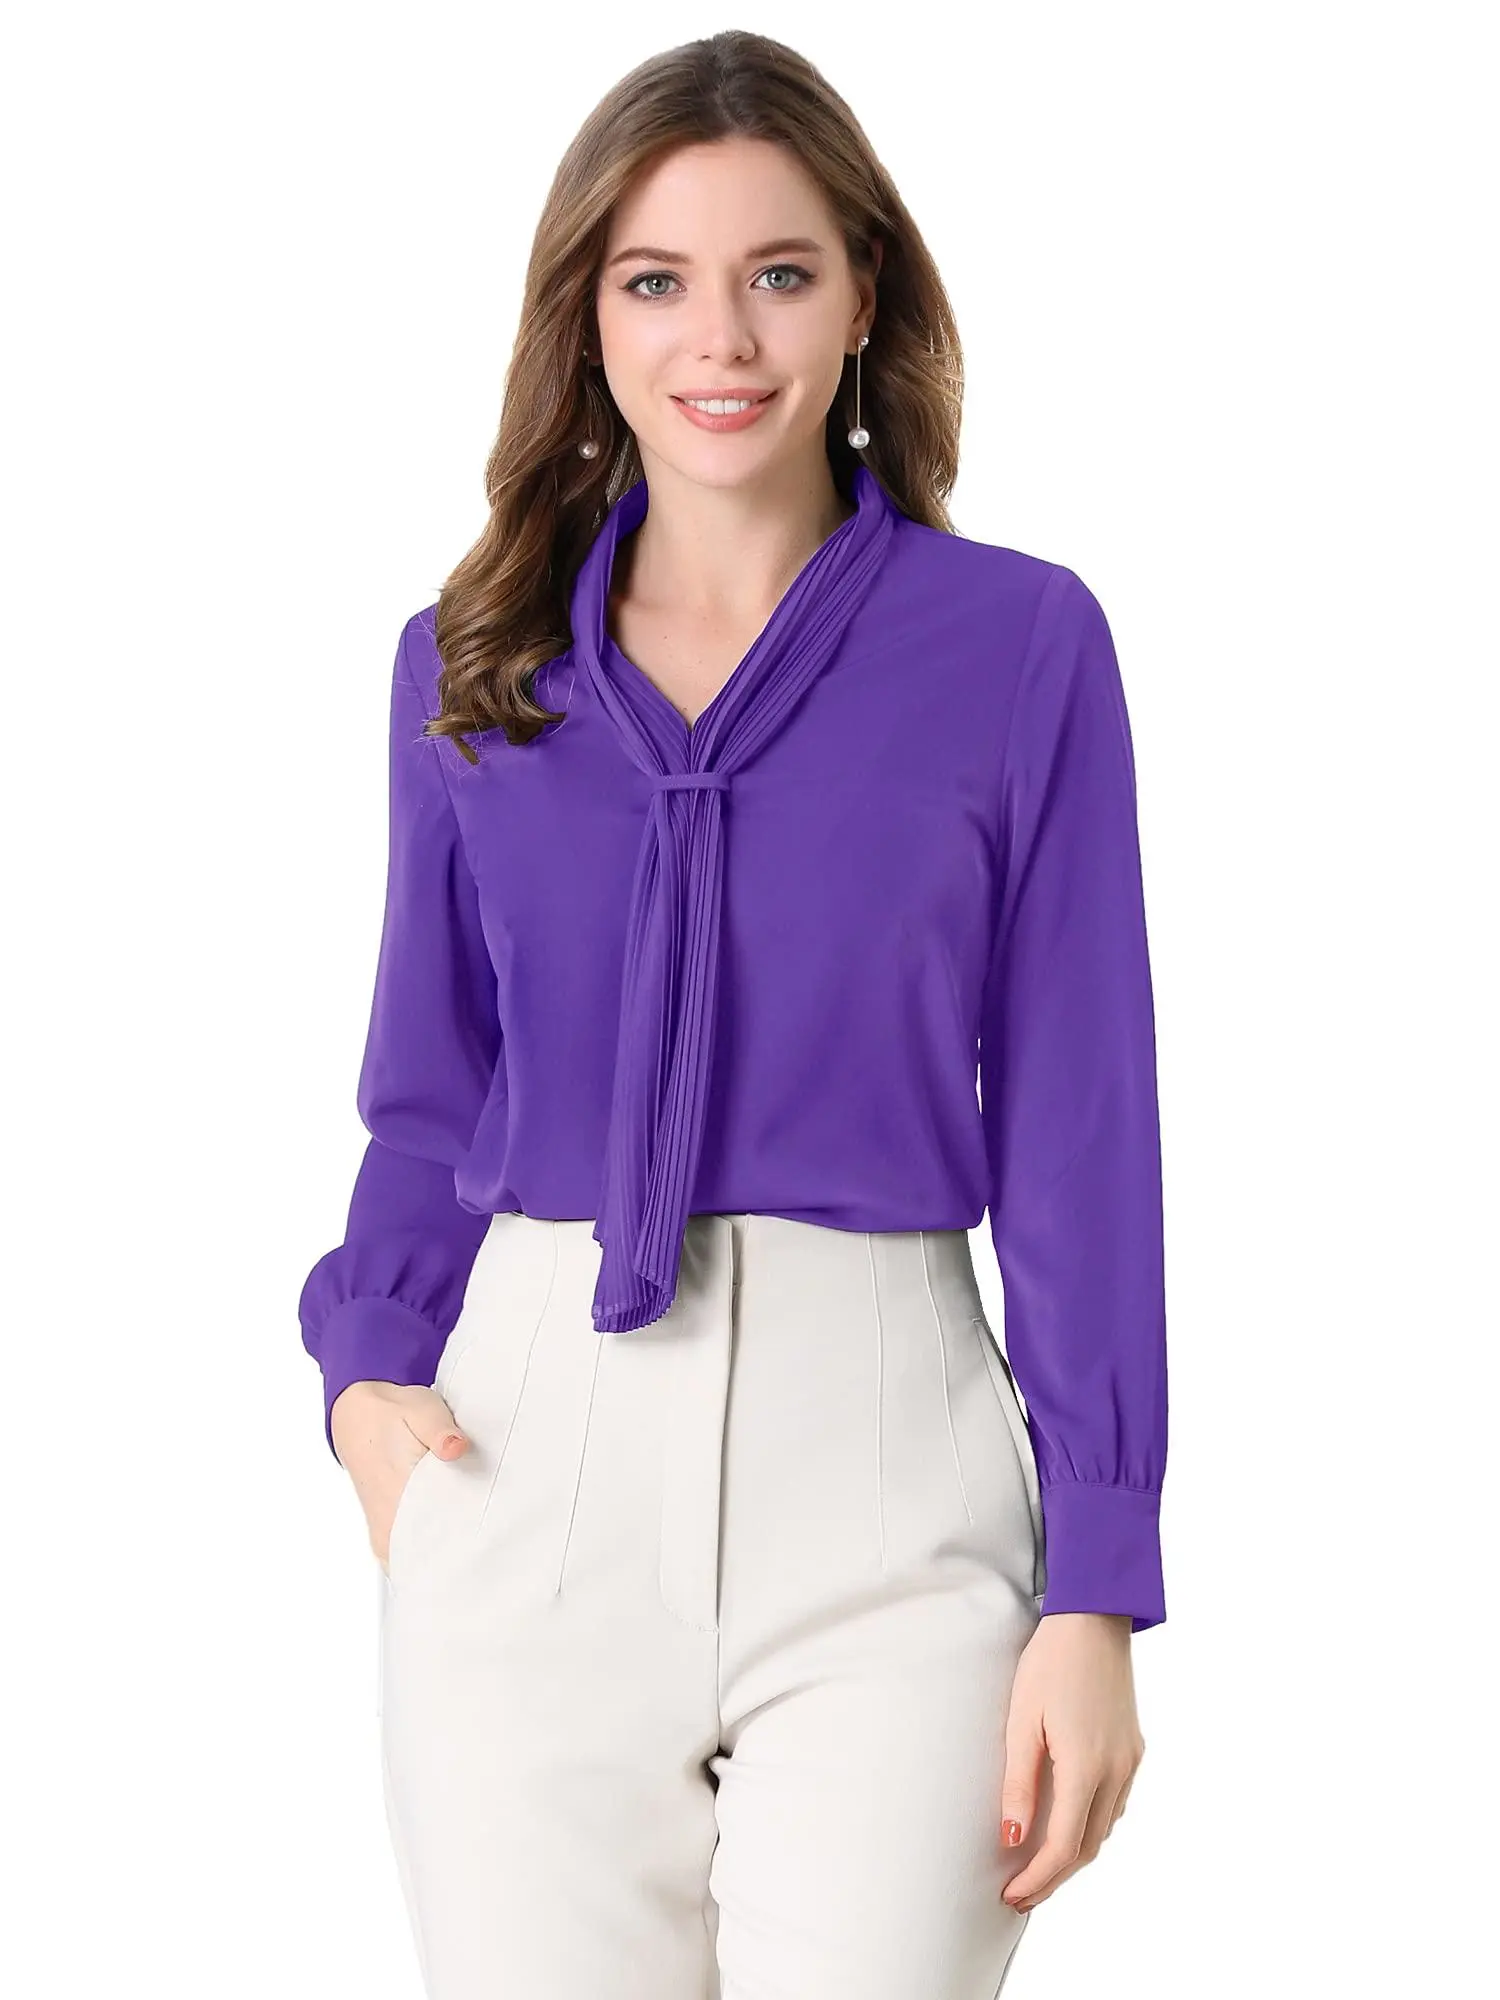 Women's Purple Long Sleeve Blouses gifts - up to −87% | Stylight